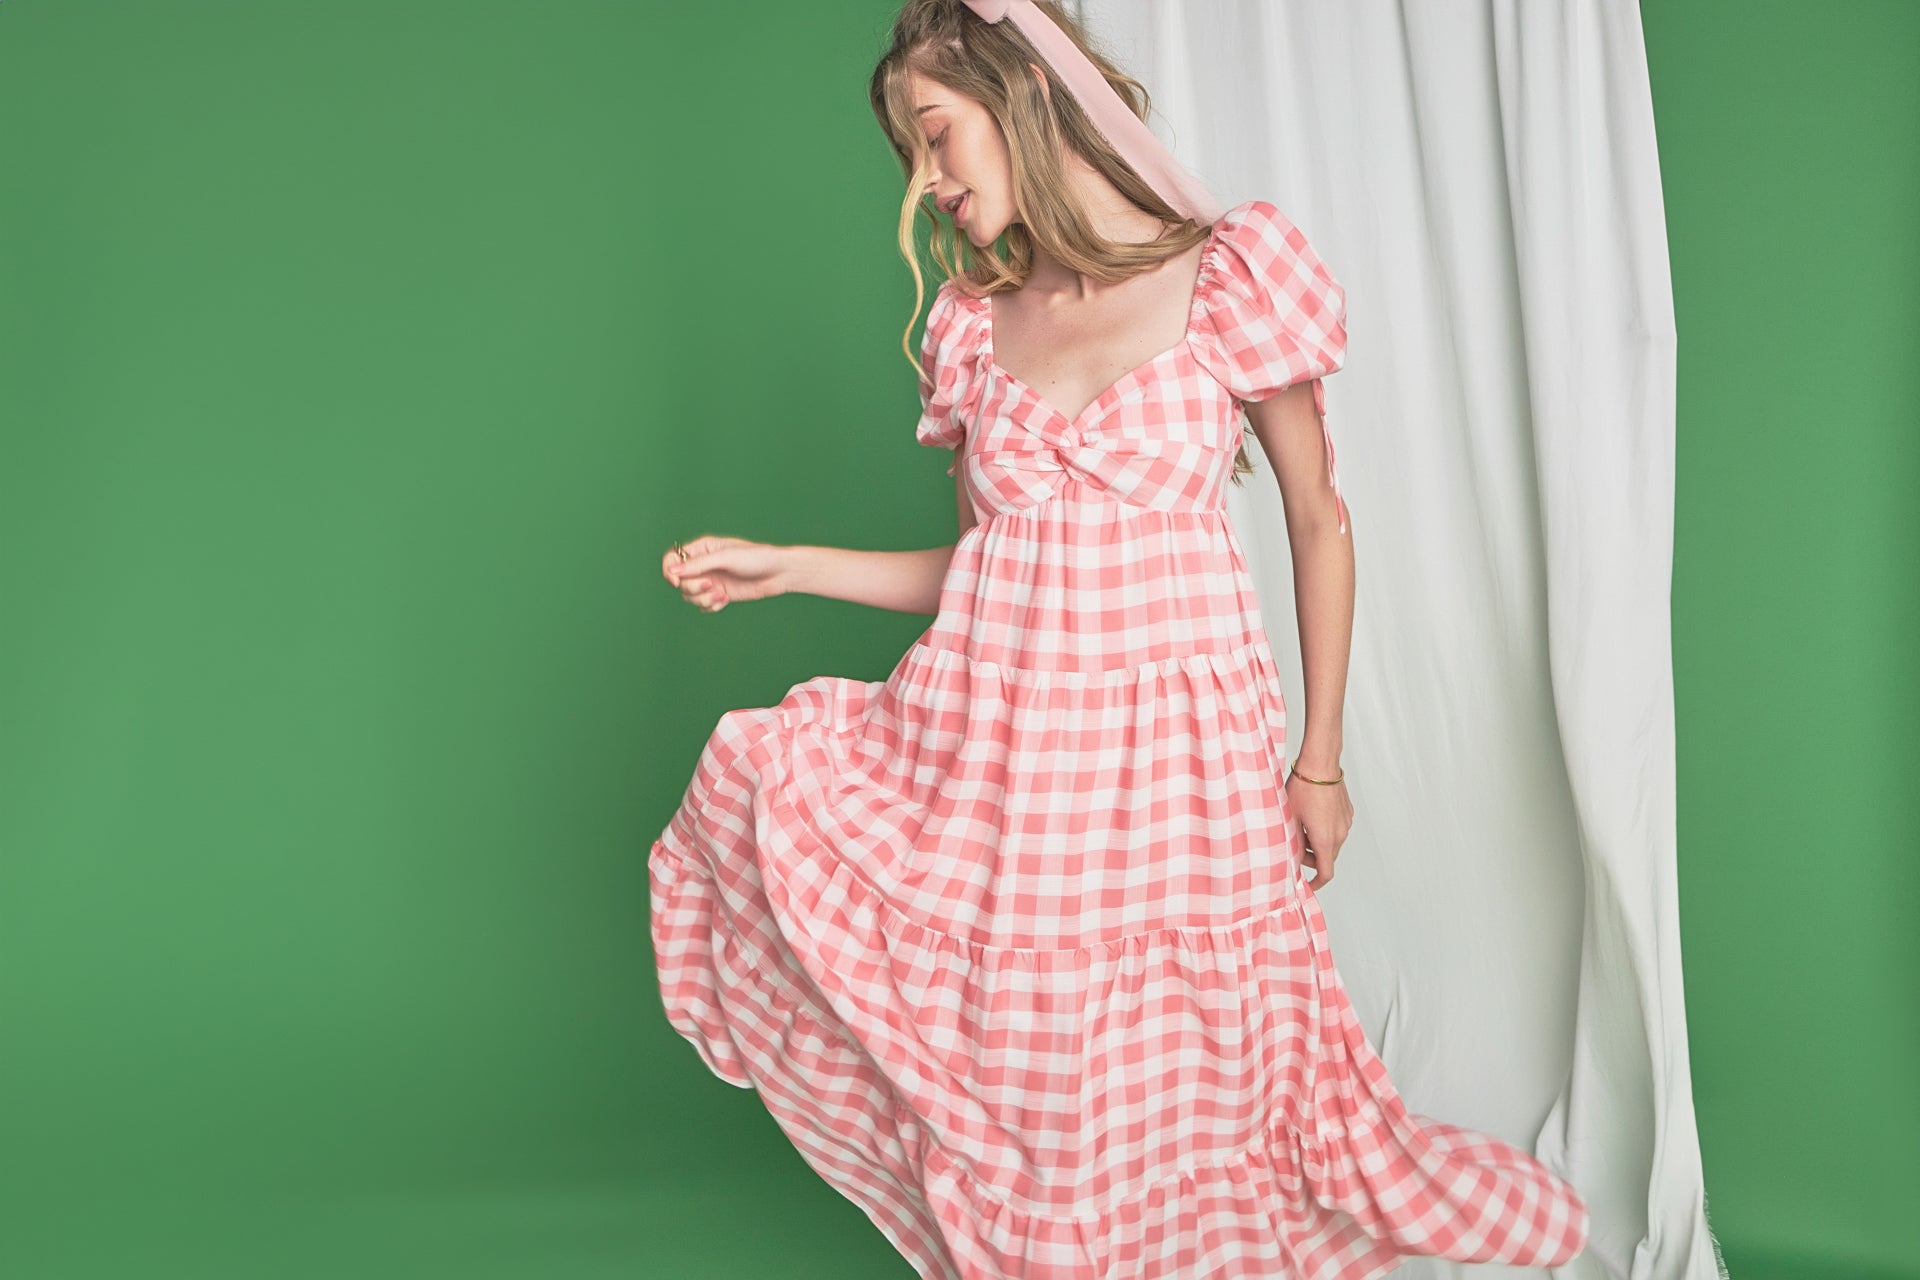 Knotted Gingham Maxi Dress - Available from English Factory at shopenglishfactory.com